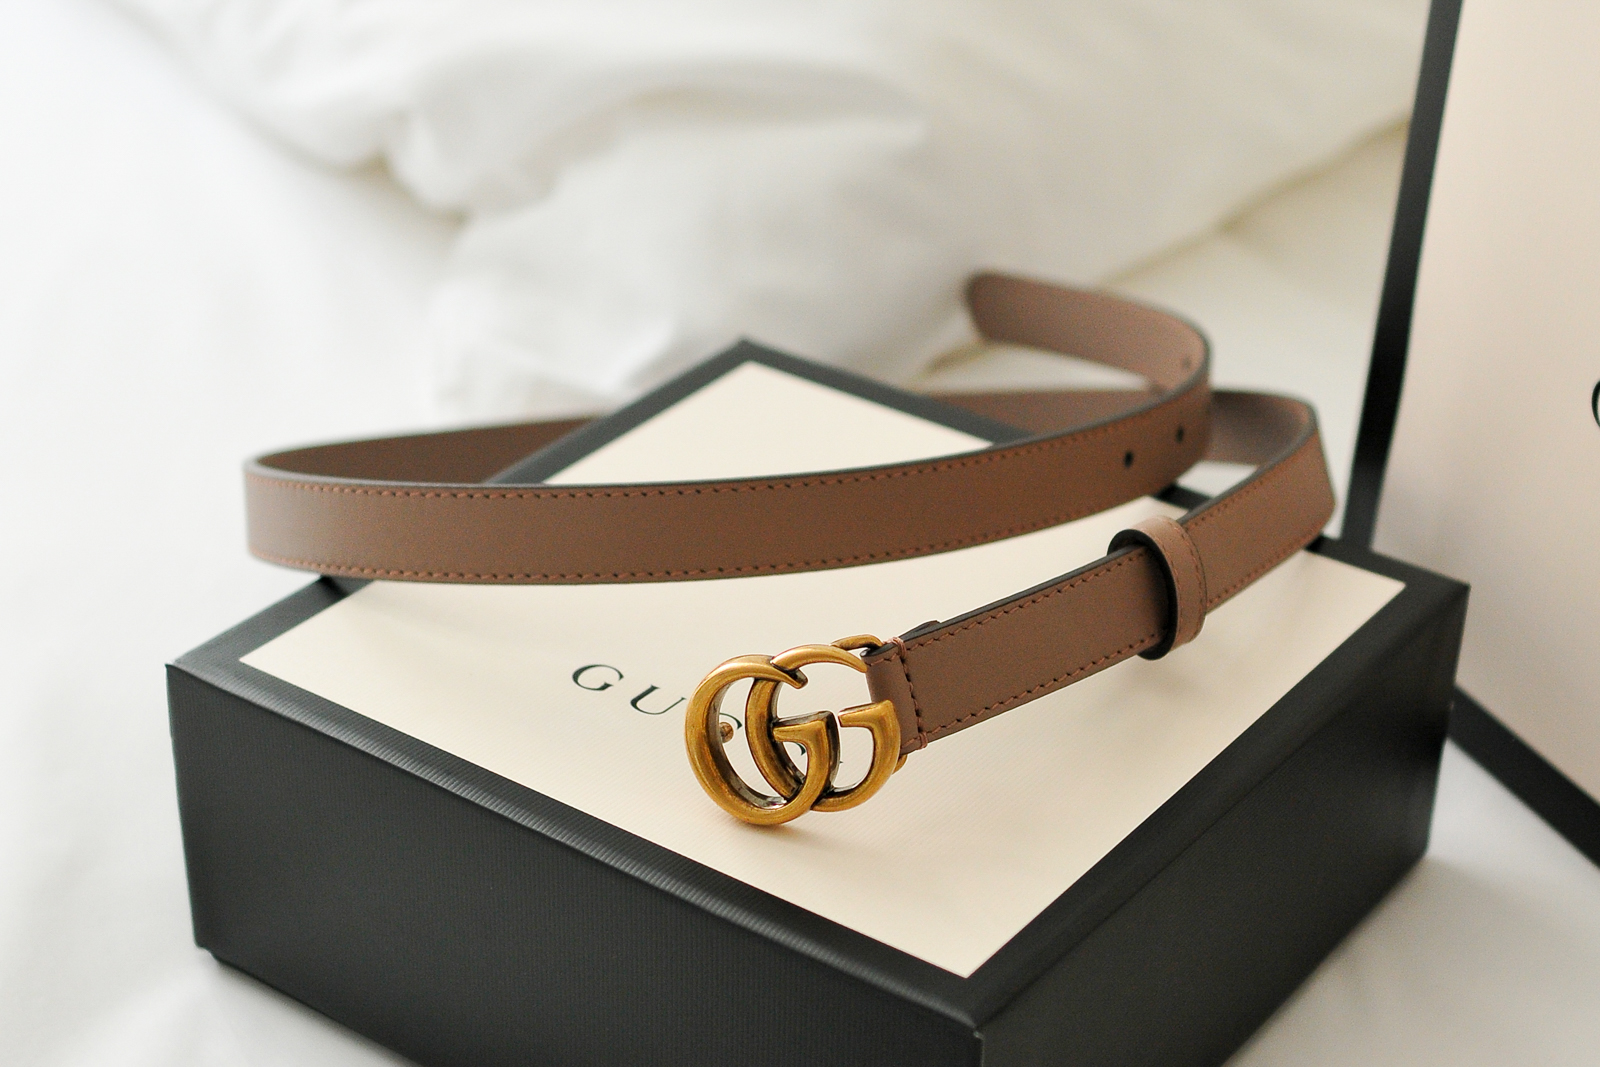 Gucci Marmont belt & ik in Lifestyle by Linda